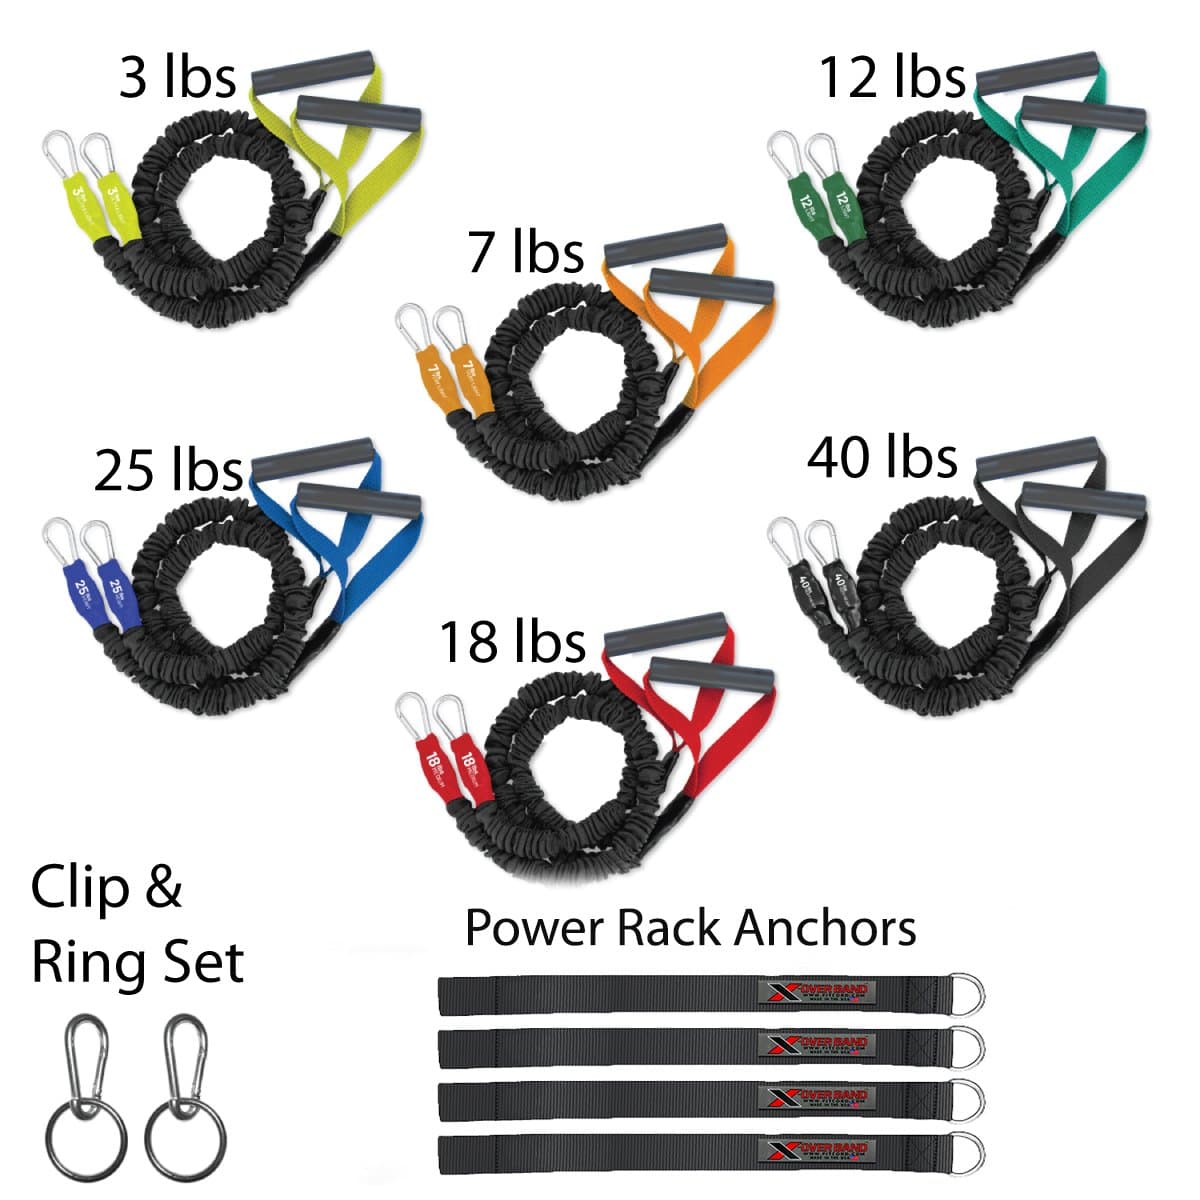 covered resistance bands for arm and shoulder care and rehab designed for working out and exercising the torso and upper body by using resistance exercise tubes that are covered and safe on the upper back, arms shoulder and chest. These bands are great for body builders, building muscle, protecting the shoulder and arm, rehabilitation after a shoulder or arm injury and prtecting your rotator cuff when lifting weights, doing crossfit and even workout out.